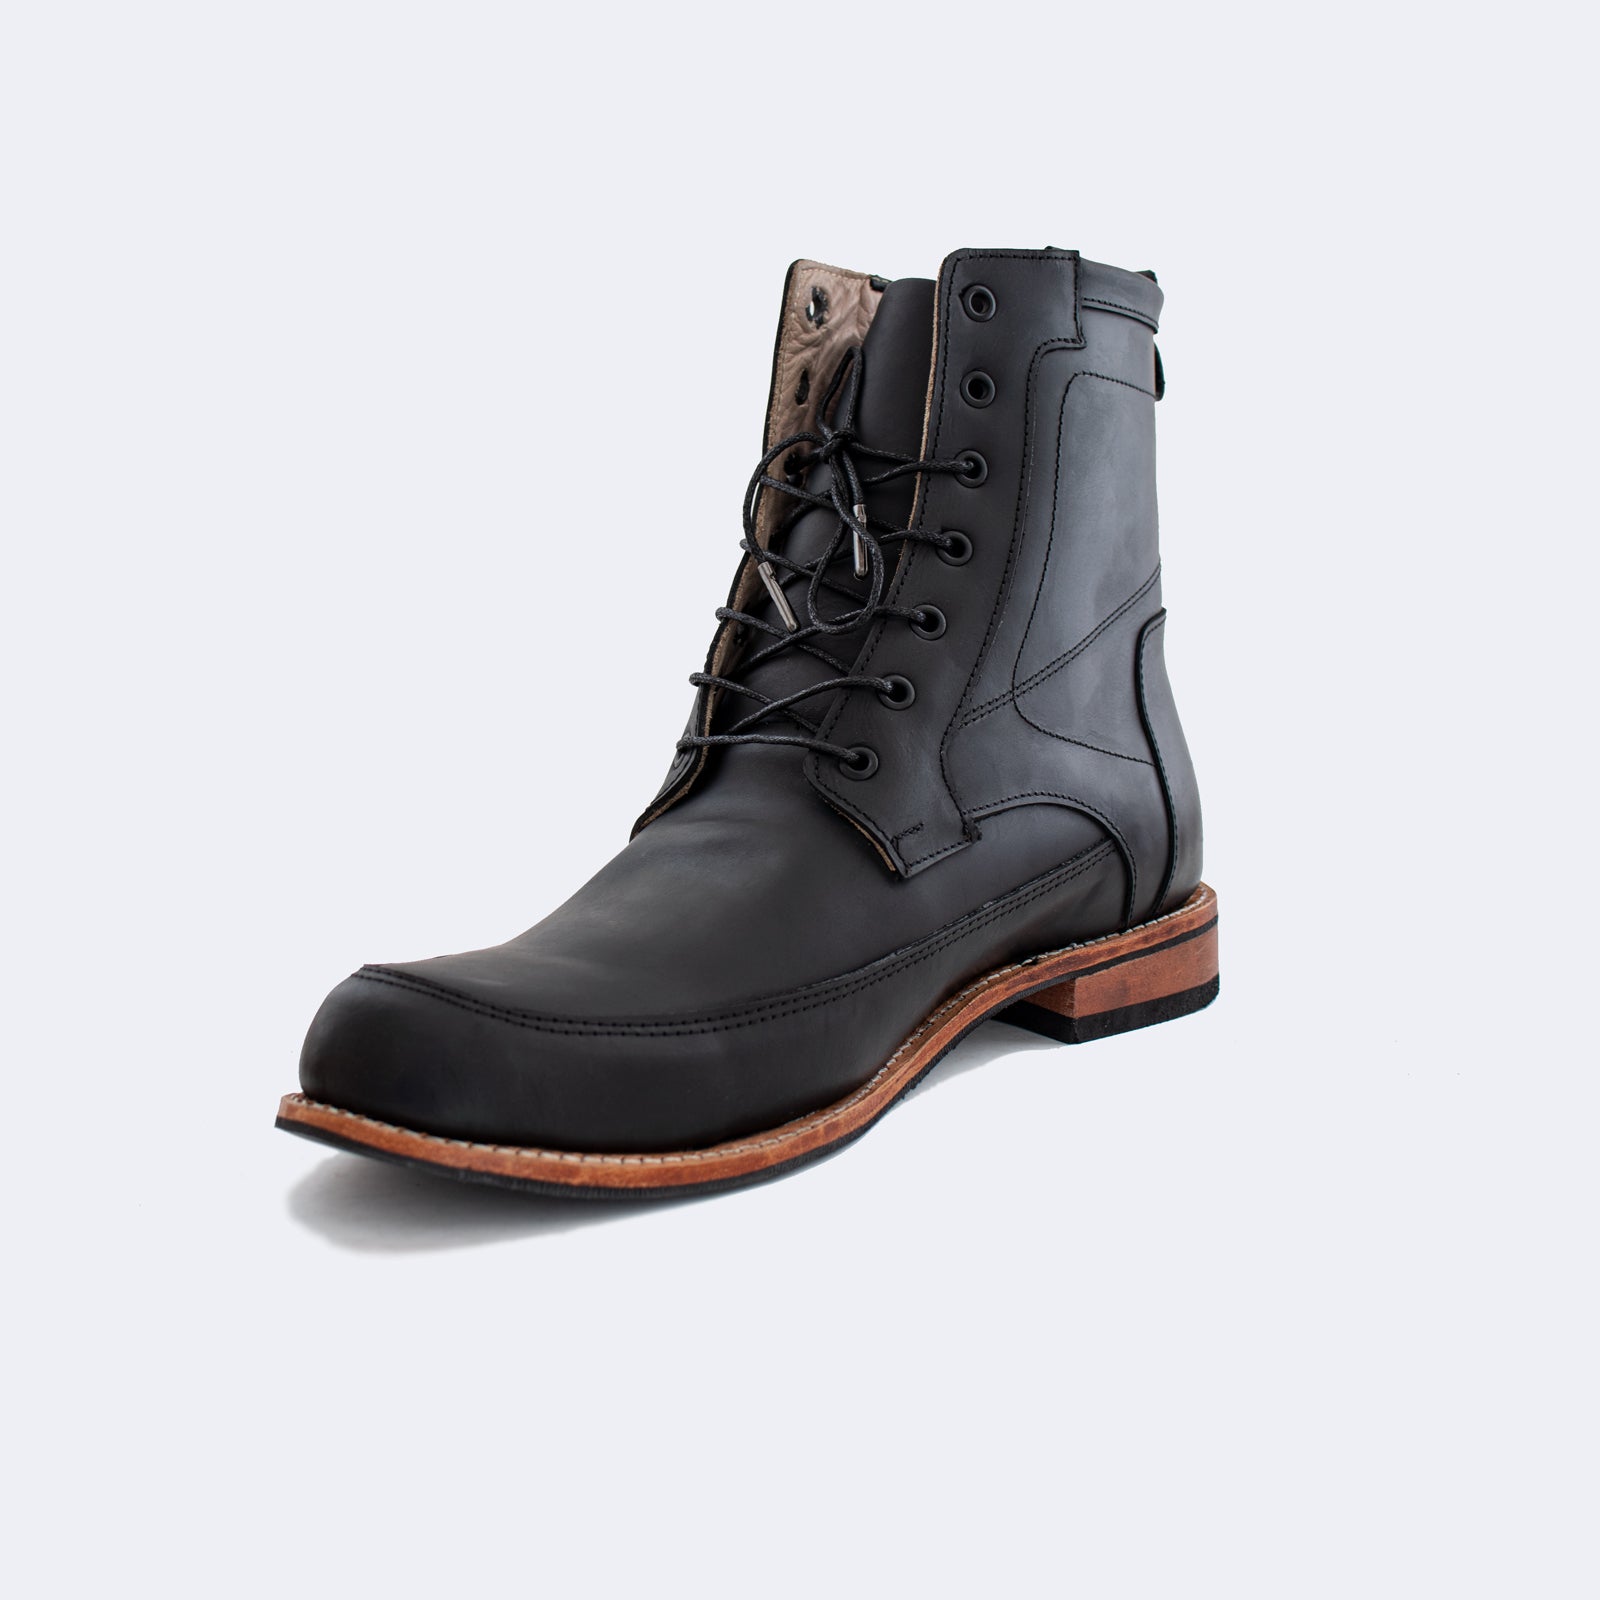 H1231 - The Holy Boot Black Edition.